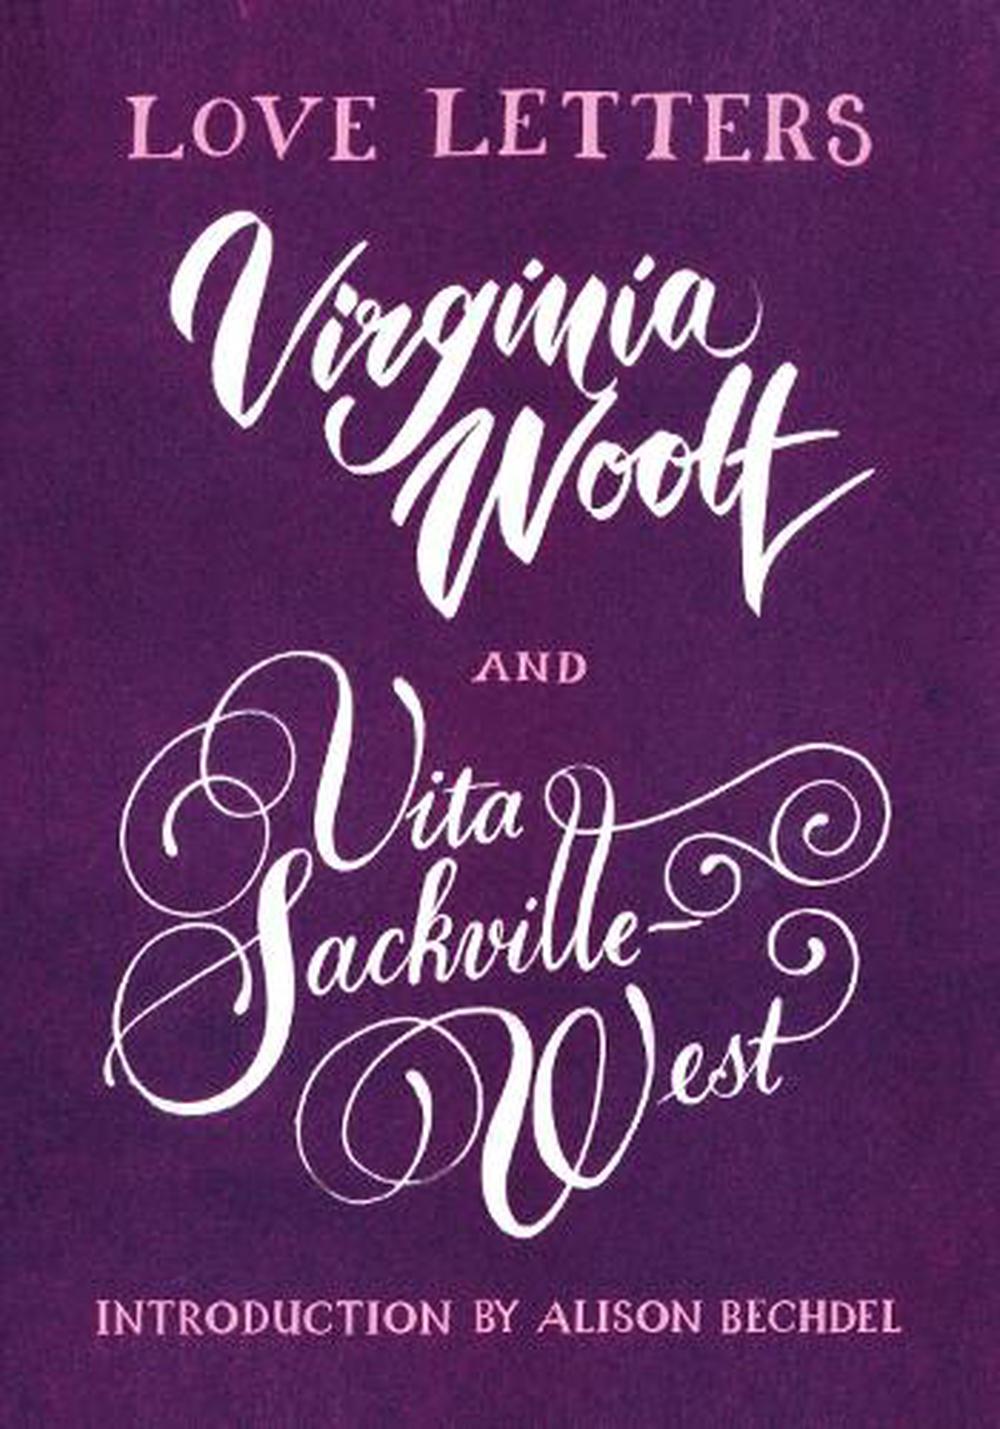 The Diary of Virginia Woolf review – a book for the ages, Virginia Woolf